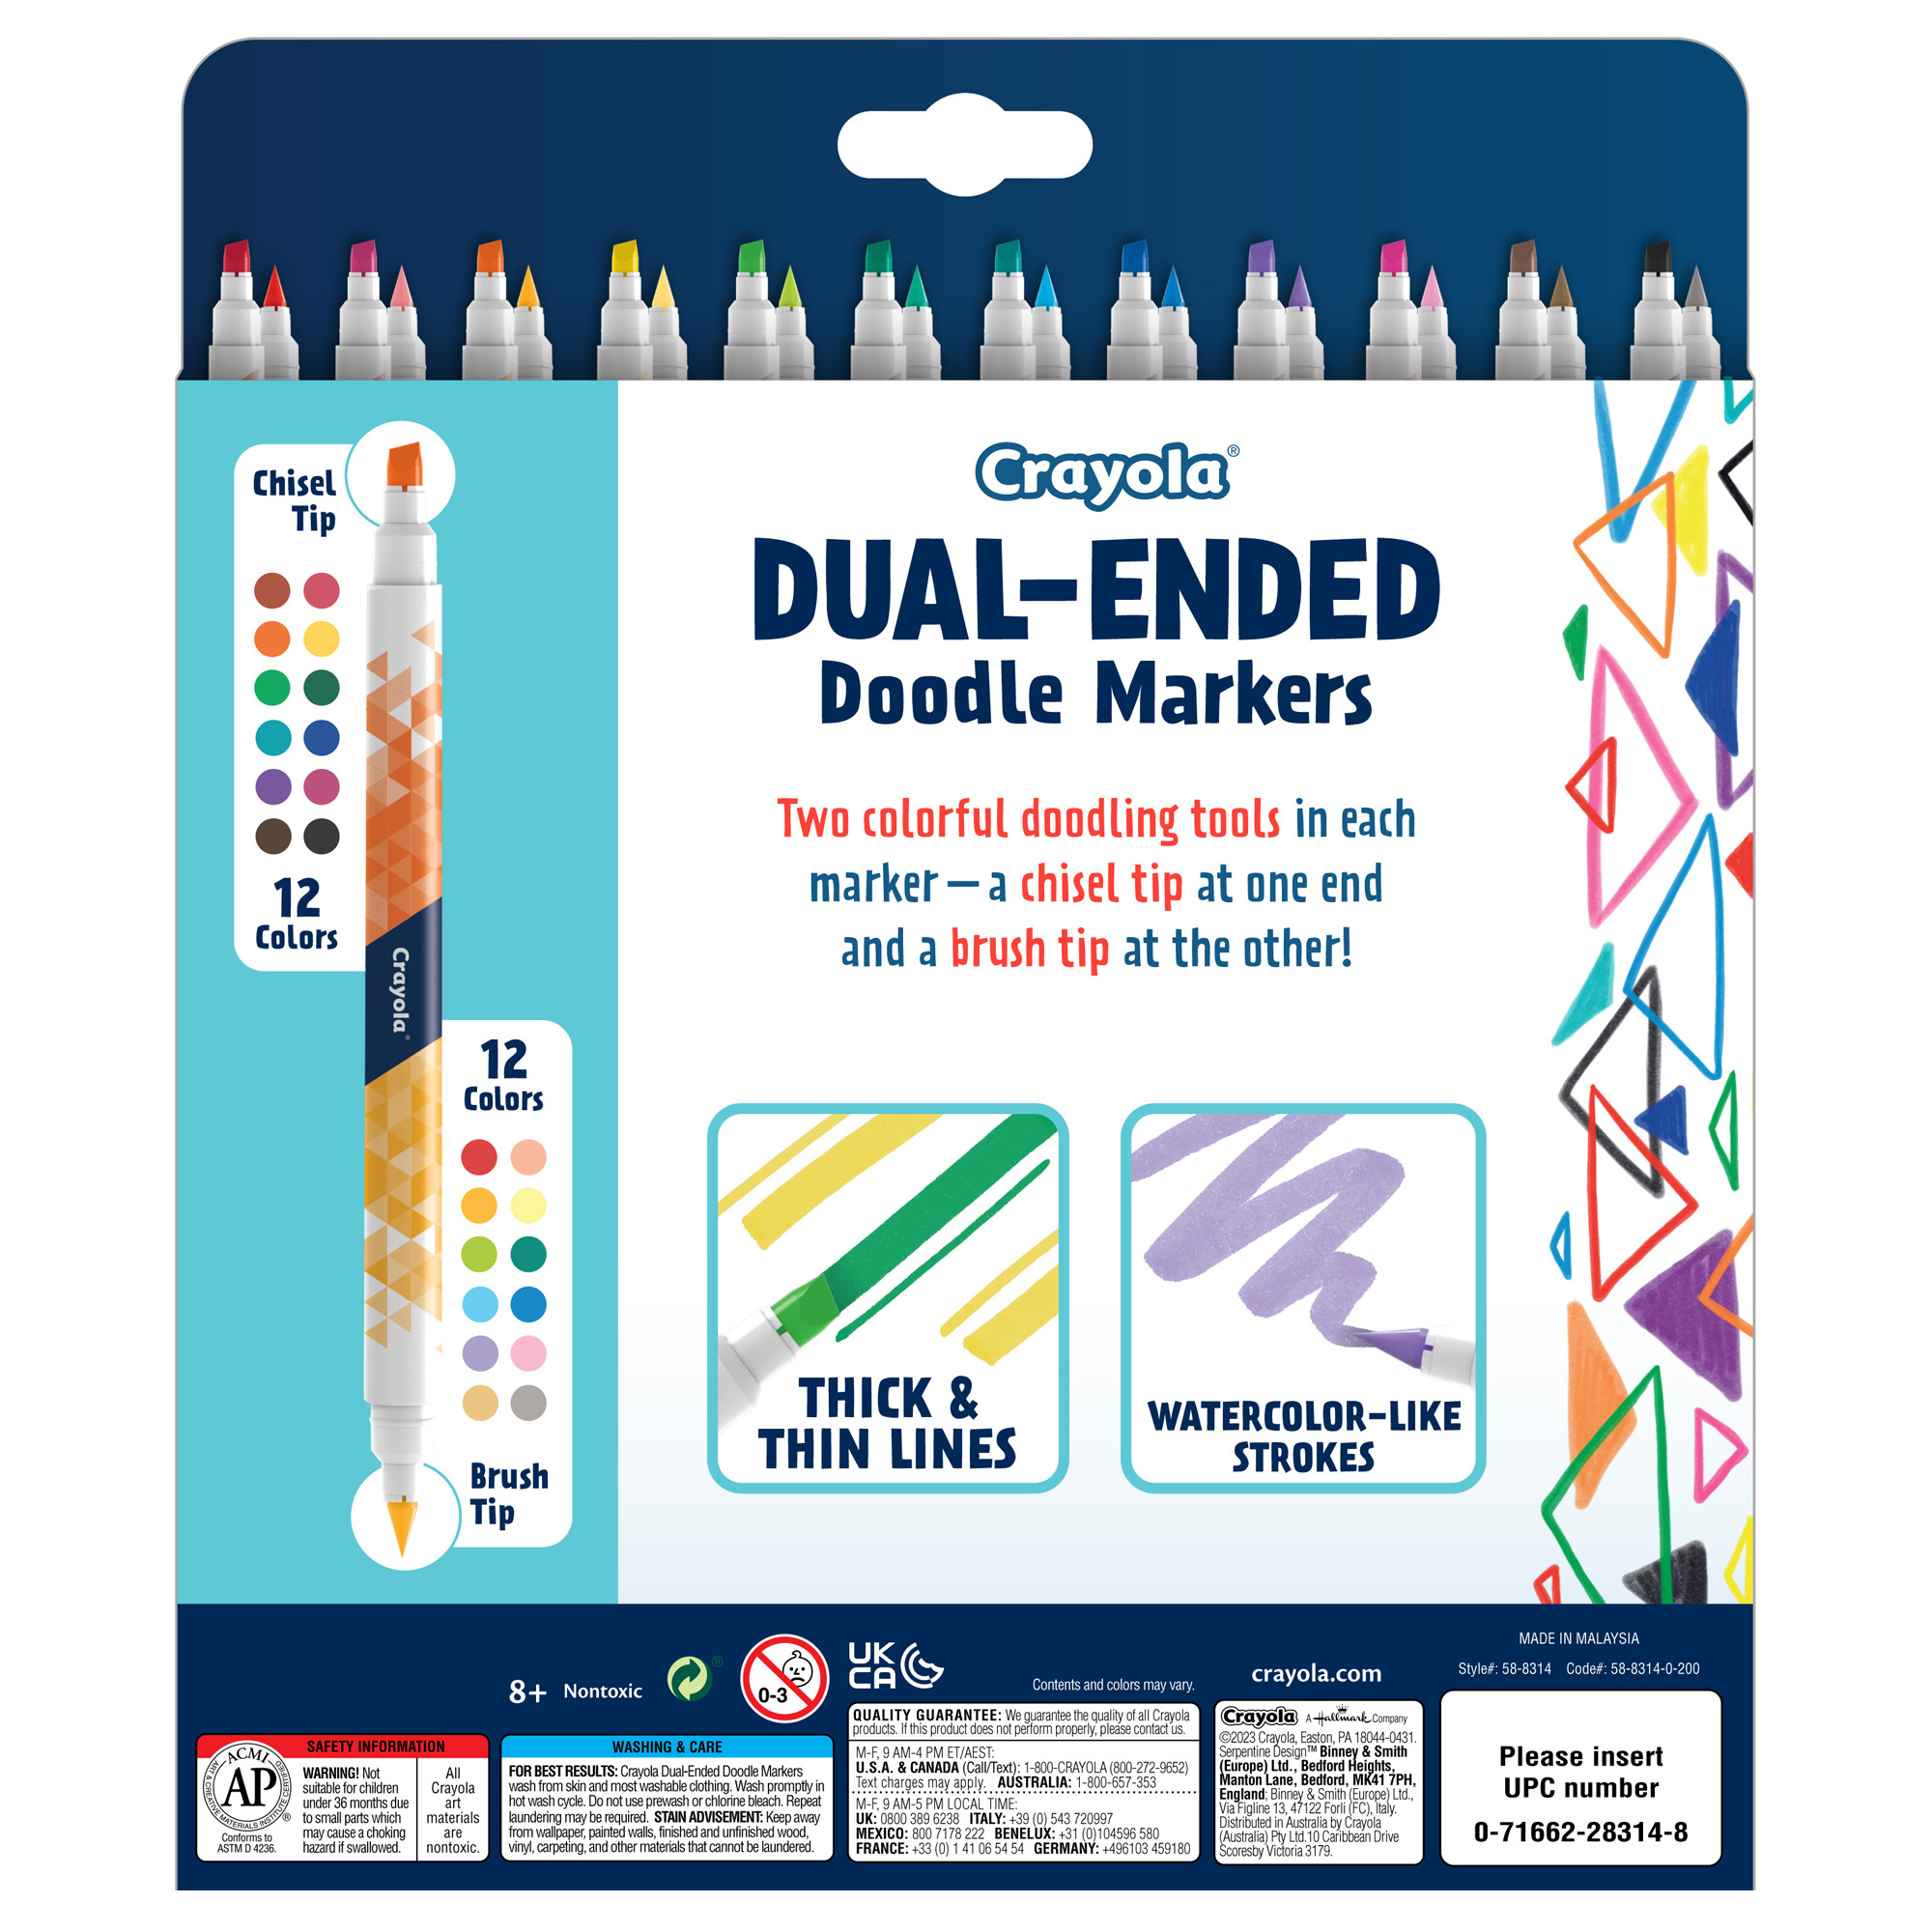 The Teachers' Lounge®  Doodle & Draw Dual-Ended Doodle Marker, 12 Count